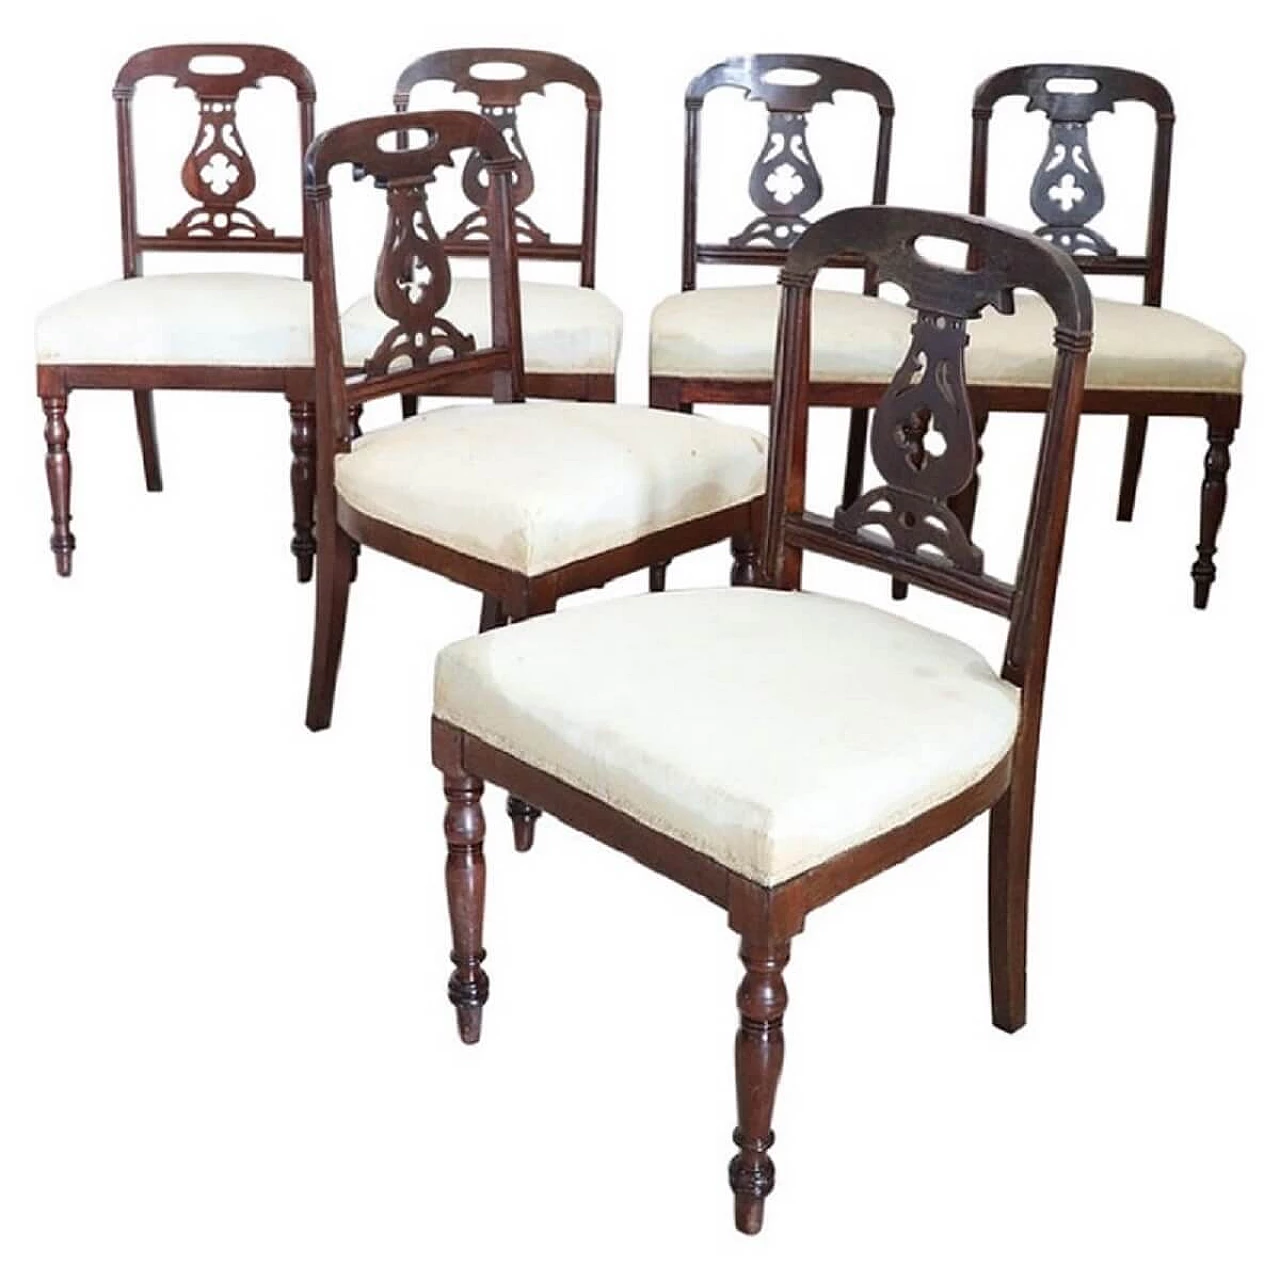 6 English chairs in solid mahogany and fabric, 19th century 1